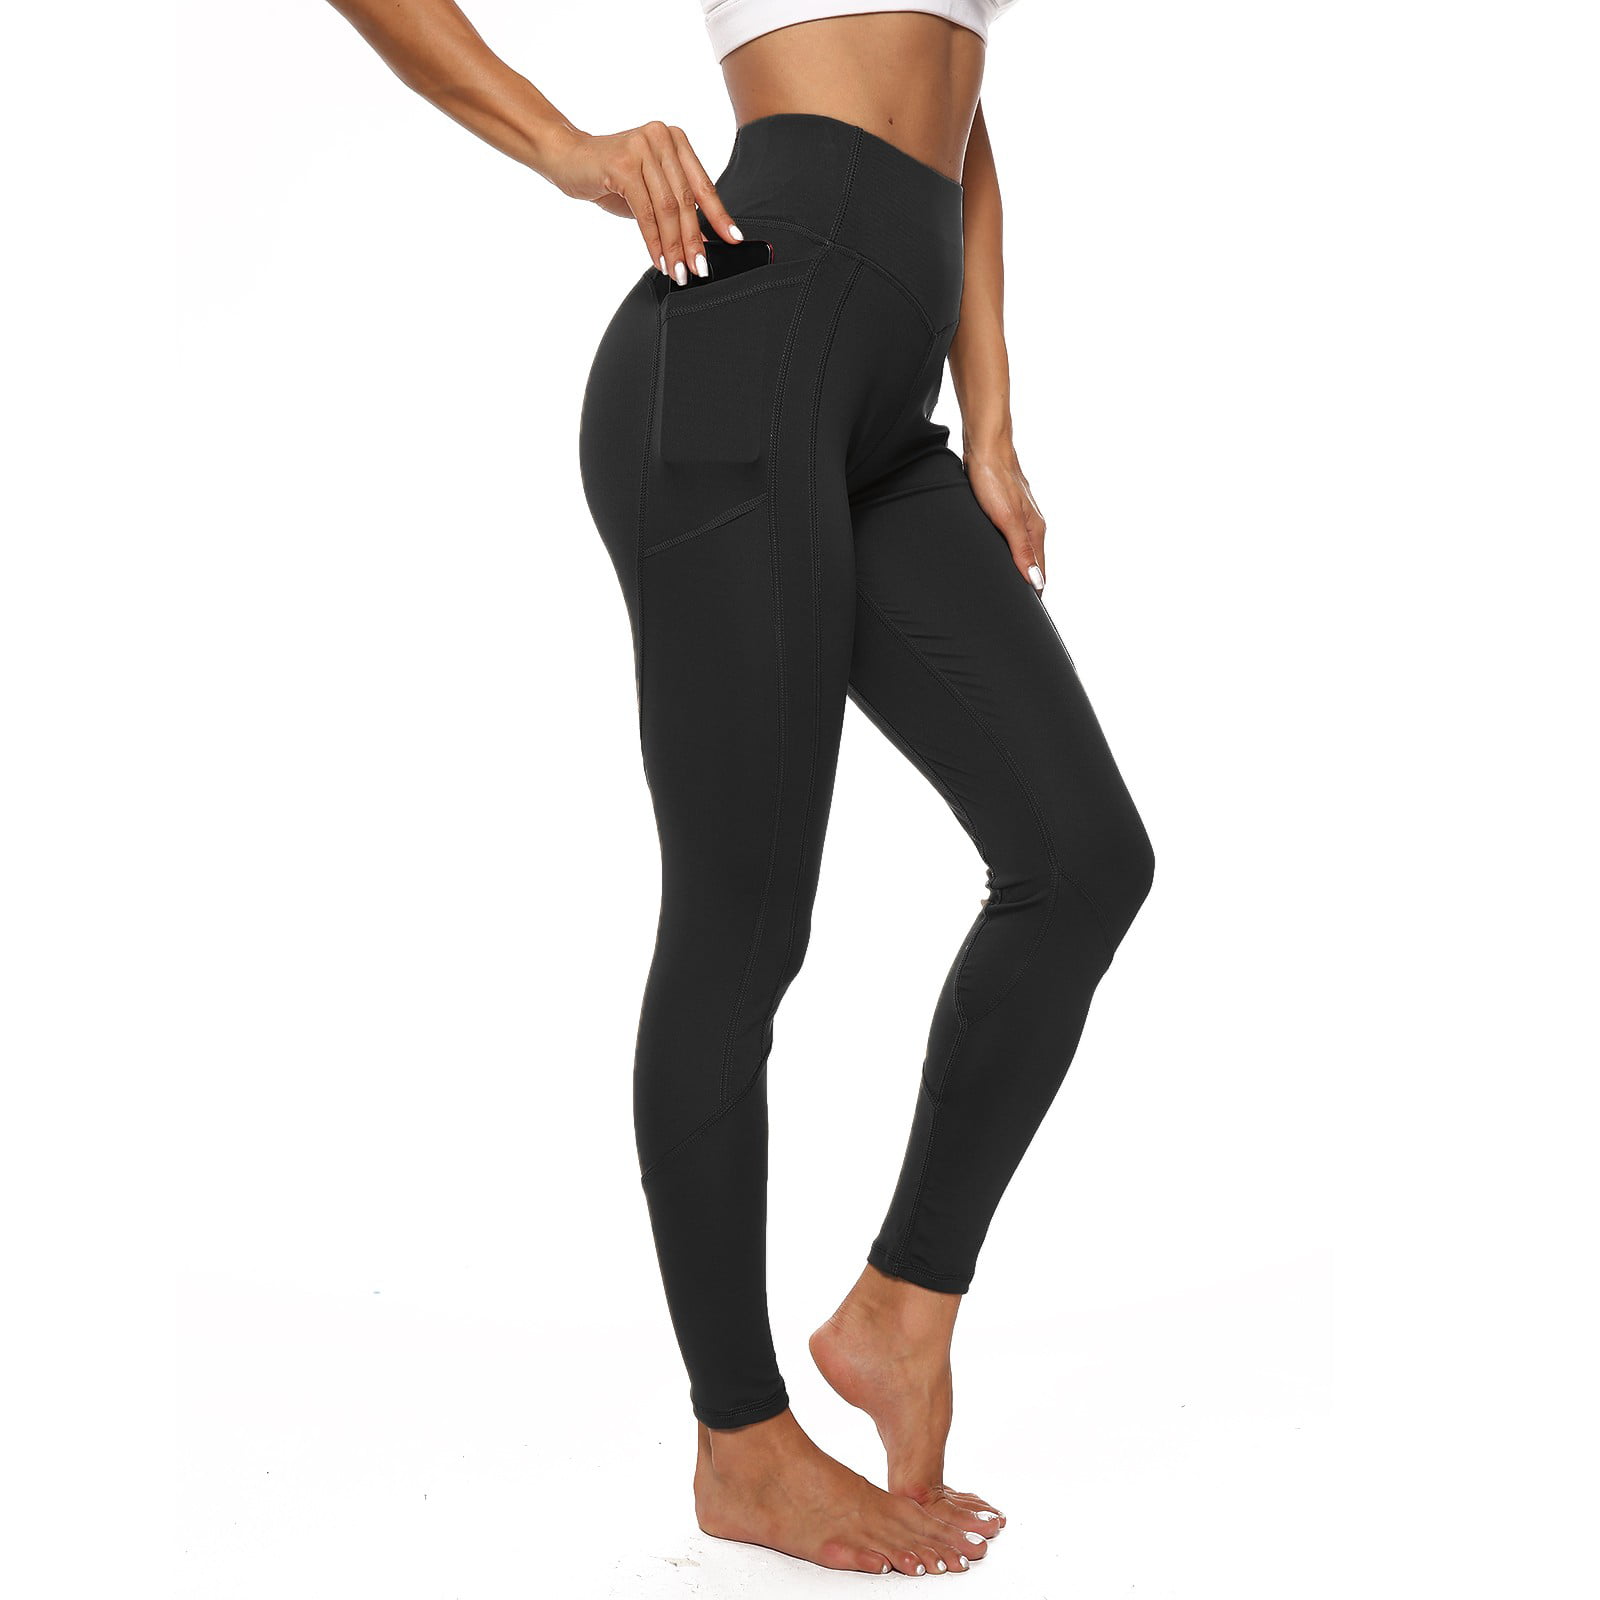 Running Leggings With Pockets Womens